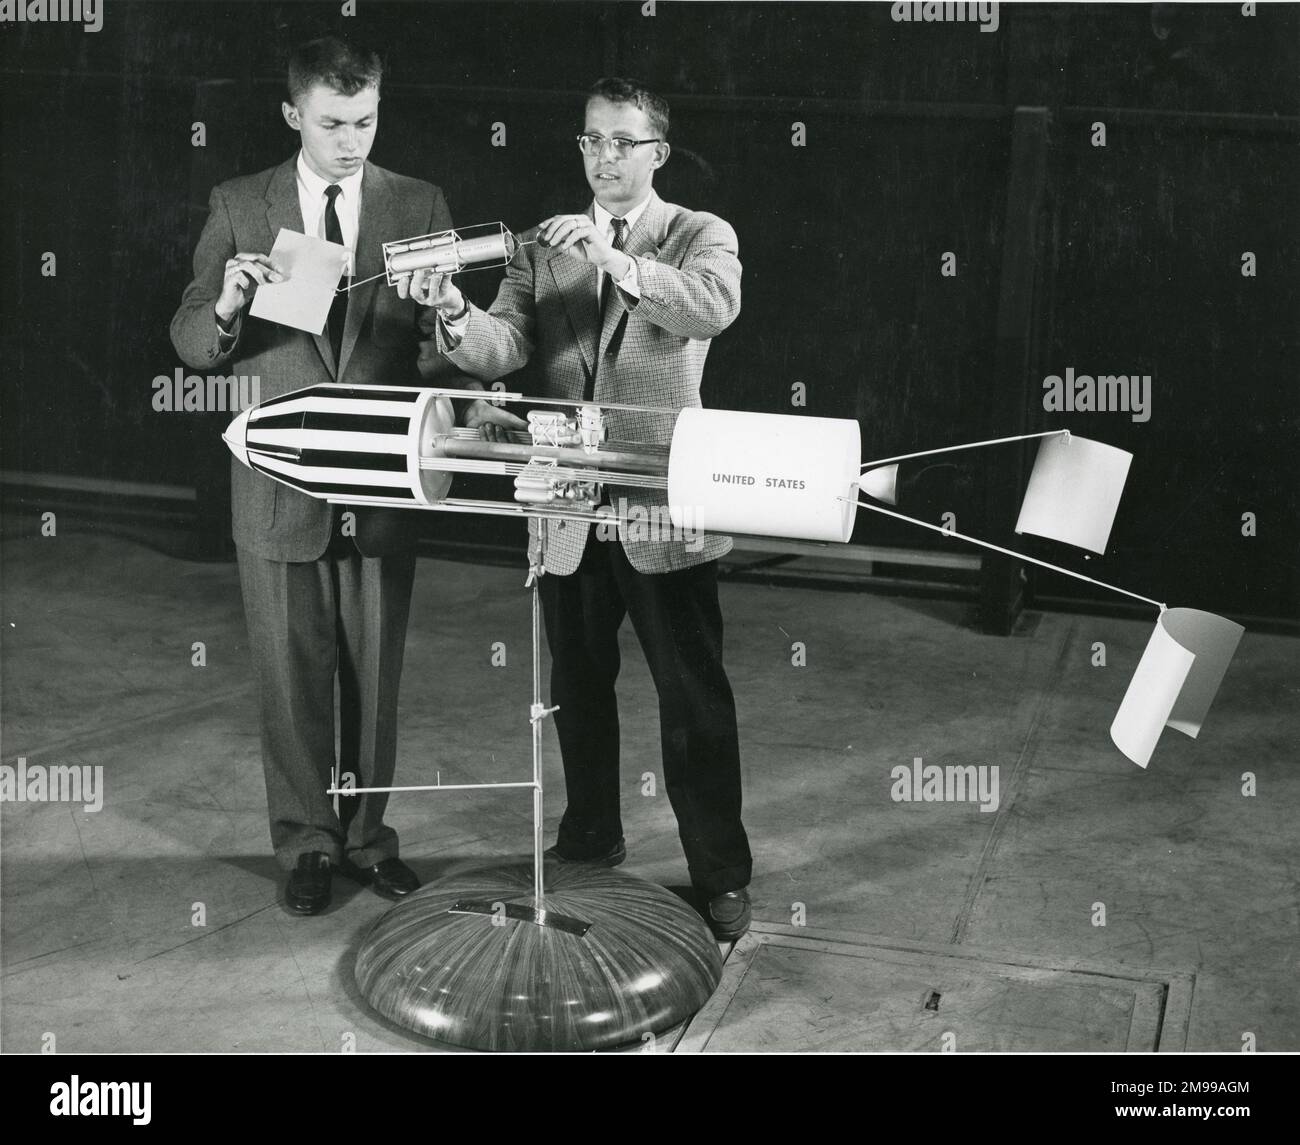 Boeing Airplane Company engineers Gary Graham, left, and Peter Downey examined segments of a model of a manned orbital research station which Boeing made public for the first time on 3 September 1959. The model was placed on display at the Air Force Association?s 1959 National Convention and Aero Space Panorama in Miami Beach. Stock Photo